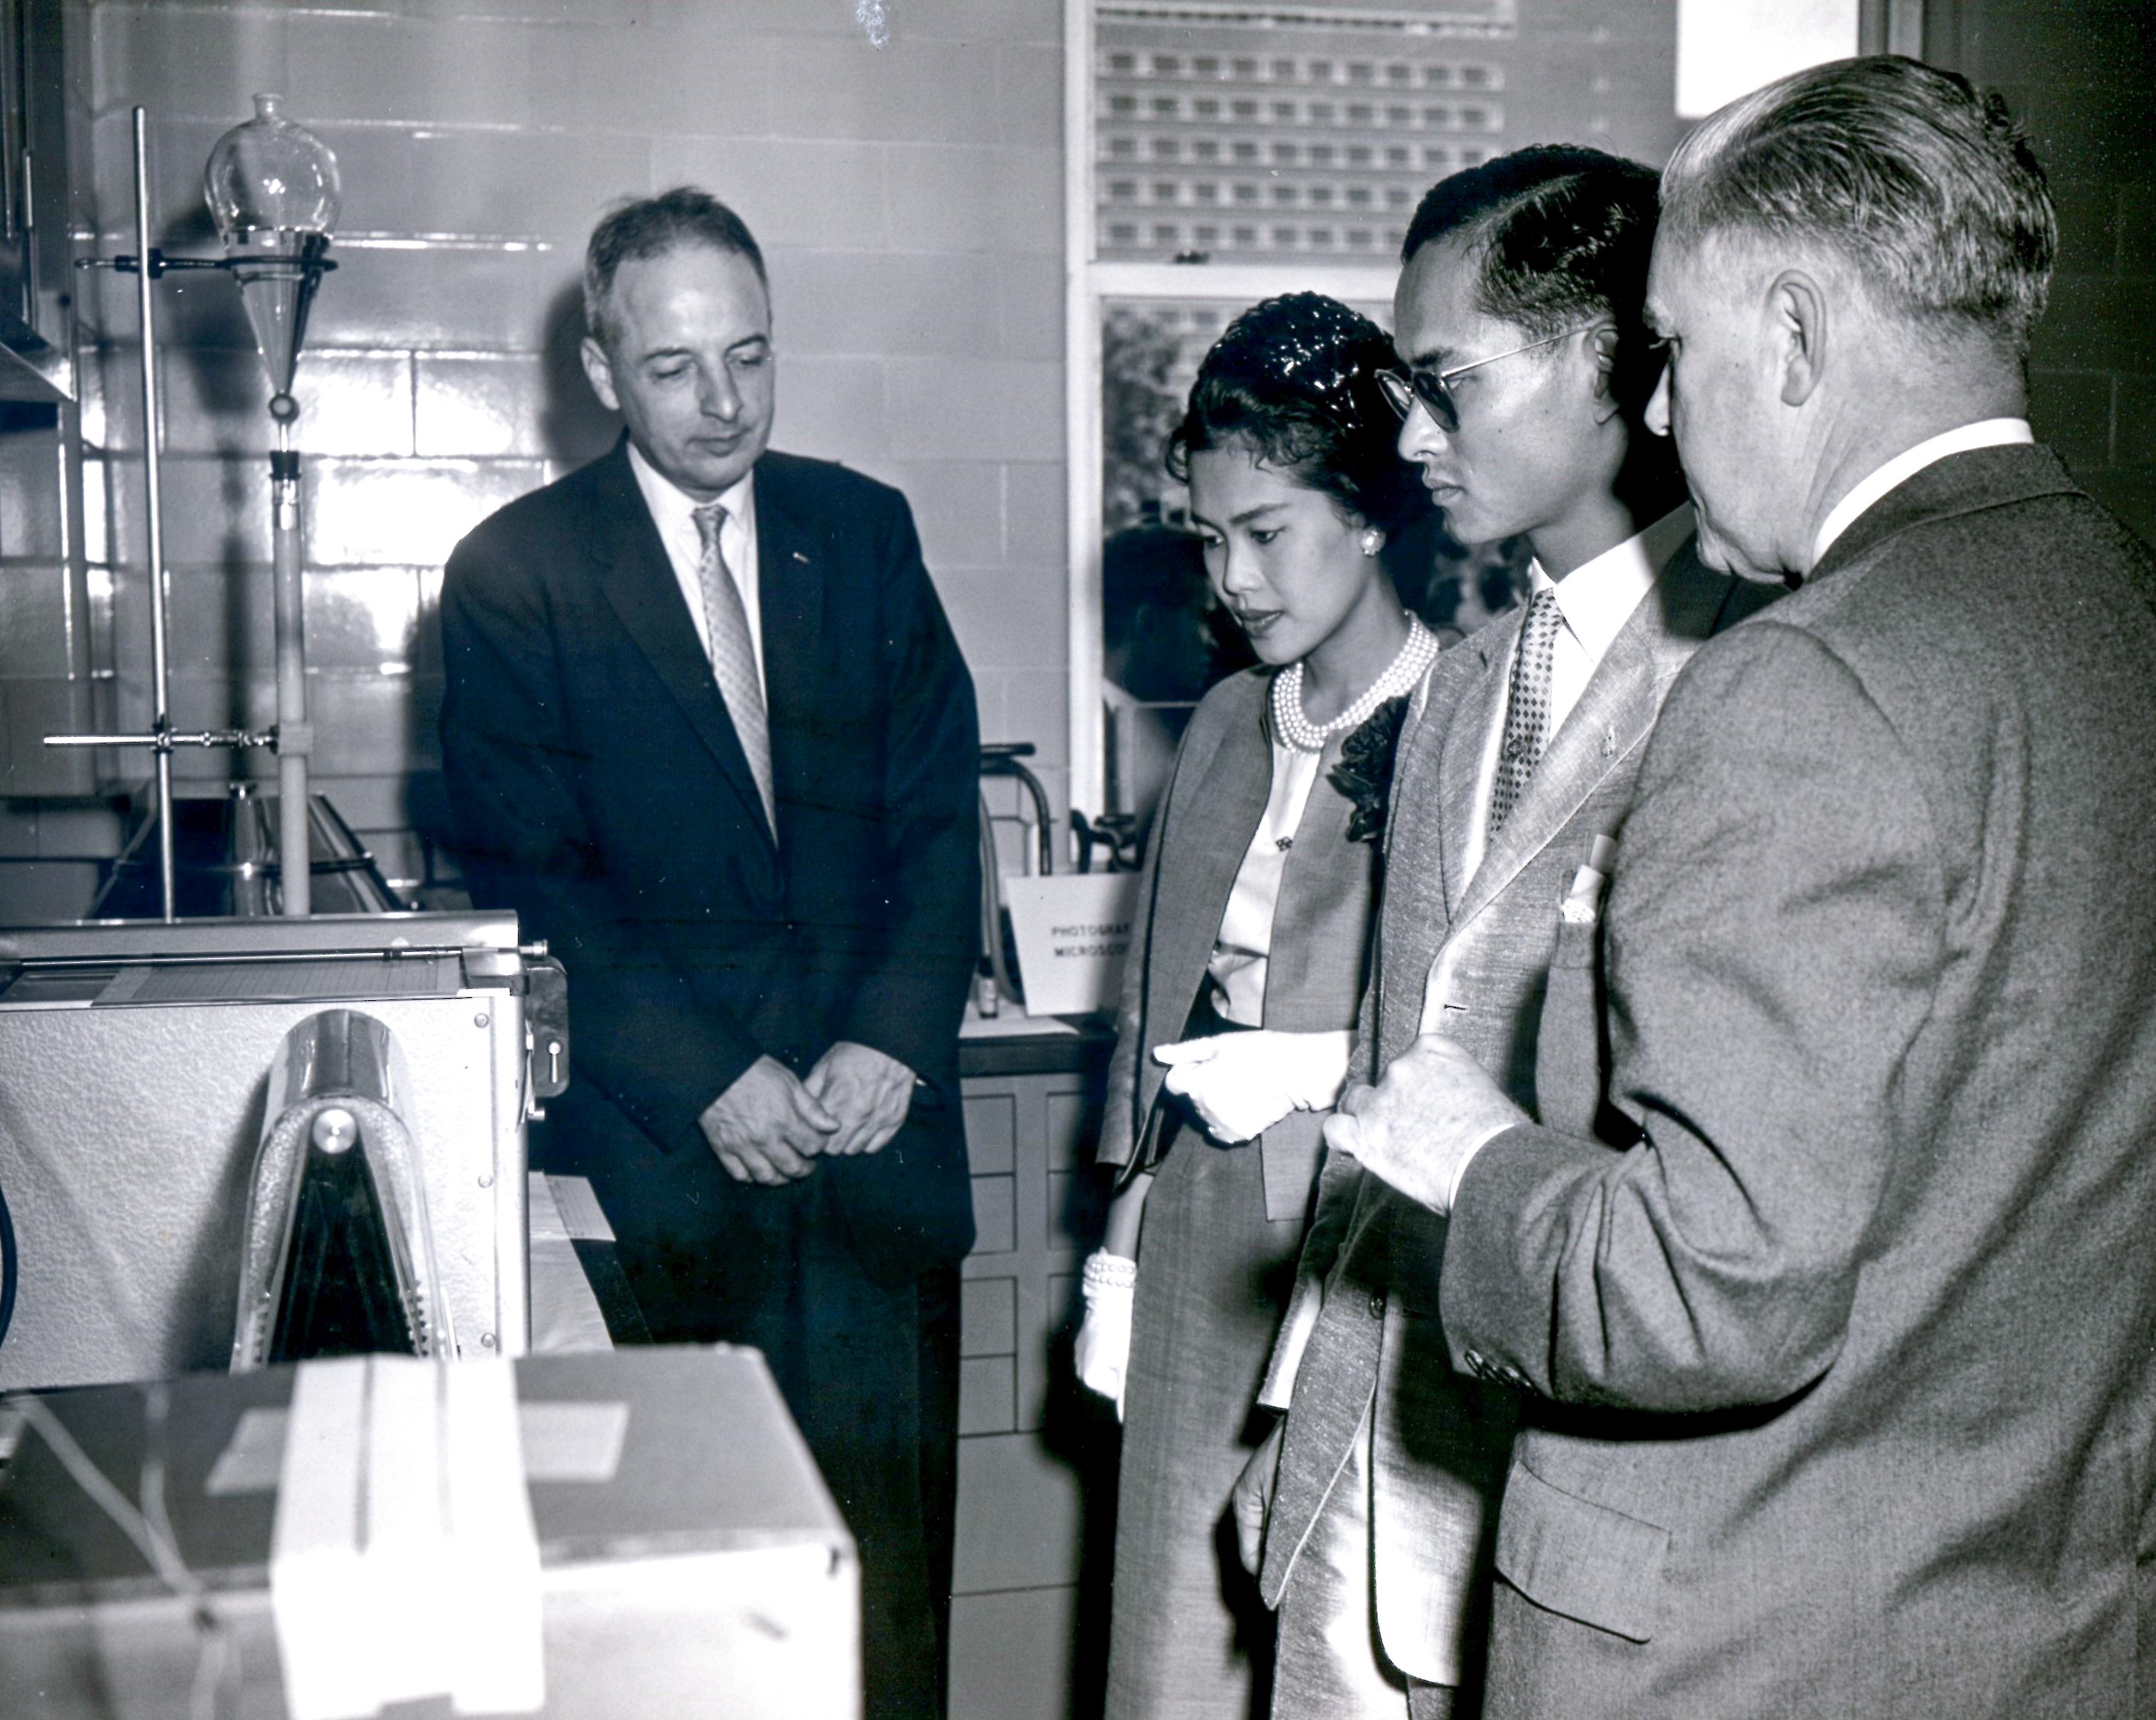 The King and Queen of Thailand touring Laboratories in Building 29 with VIPs